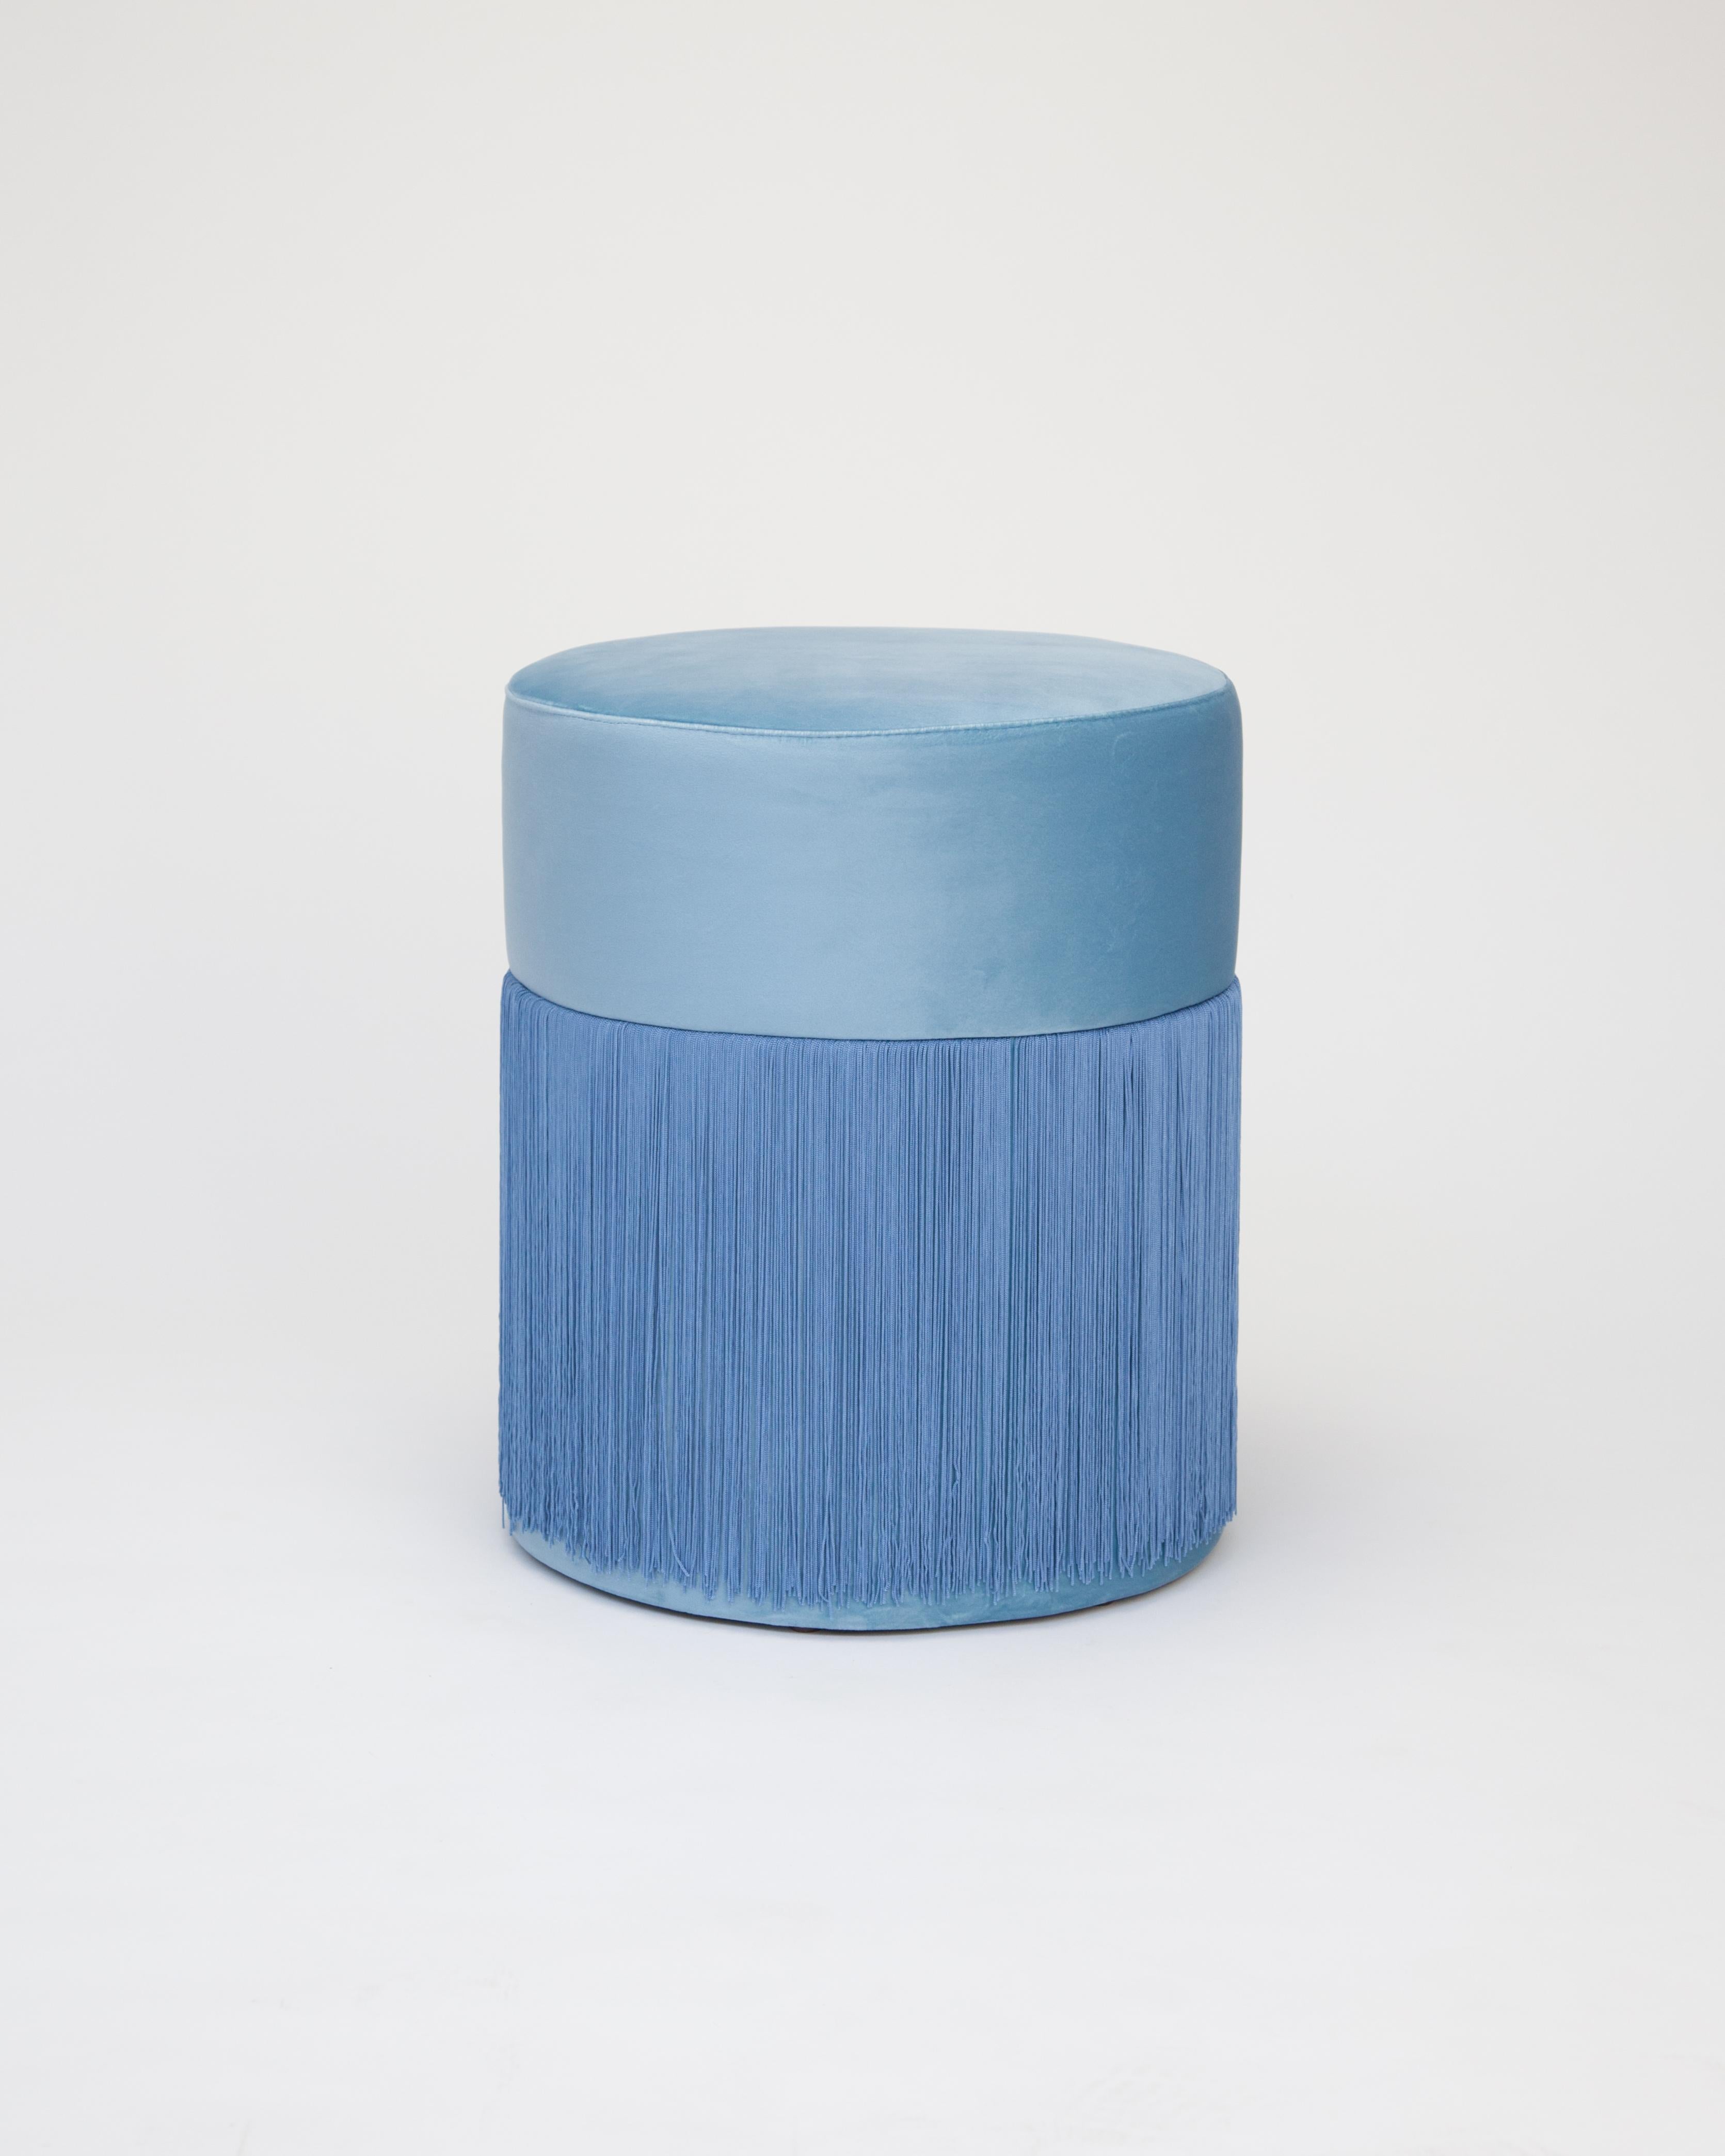 Pouf Pill S by Houtique
Dimensions: H 45 x D 35 cm
Materials: Velvet upholstery and 30cm fringes

Pill Pouf S
Art Deco style pouf with wood structure and velvet fabric.
2 fiber-board discs of 16mm, joined by wooden tufts.
Upholstery Velvet